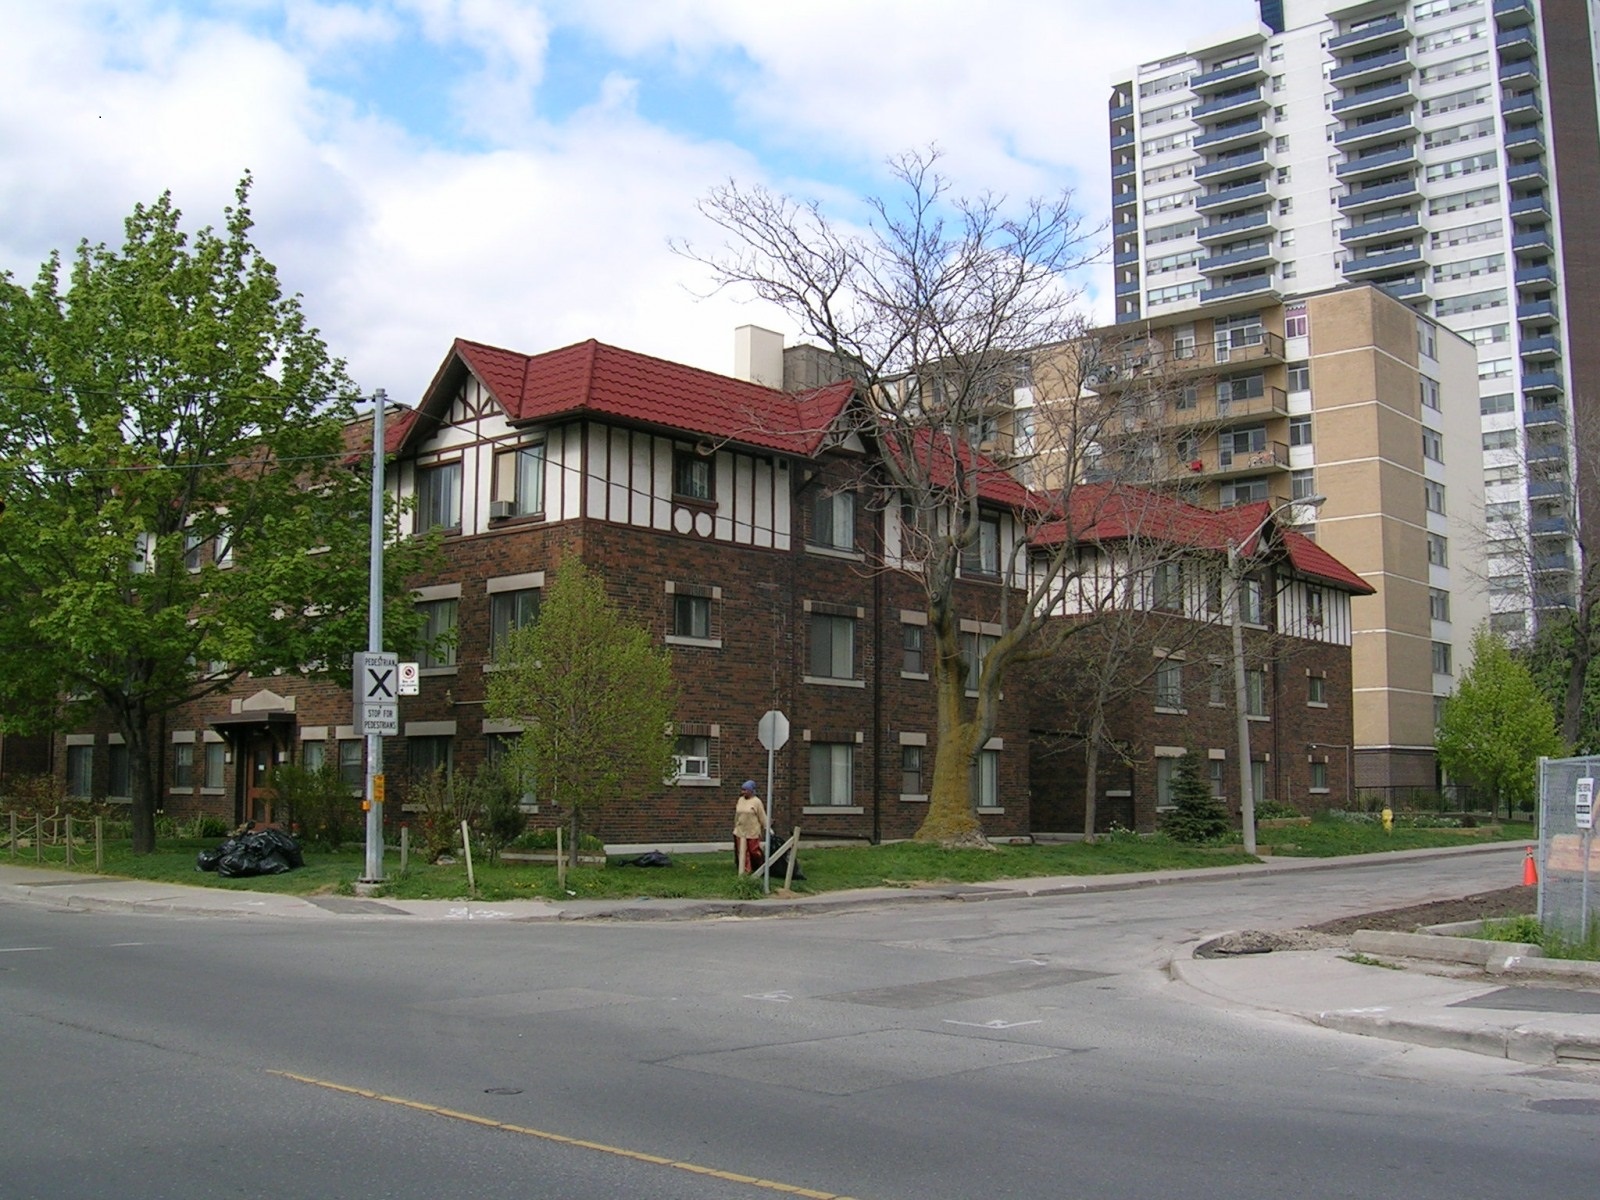 Vaughan is a three-story apartment building with 29 units for adults, single parent families, and couples. Located near Bathurst and St. Clair, Vaughan provides safe and affordable housing for new immigrants and refugees.